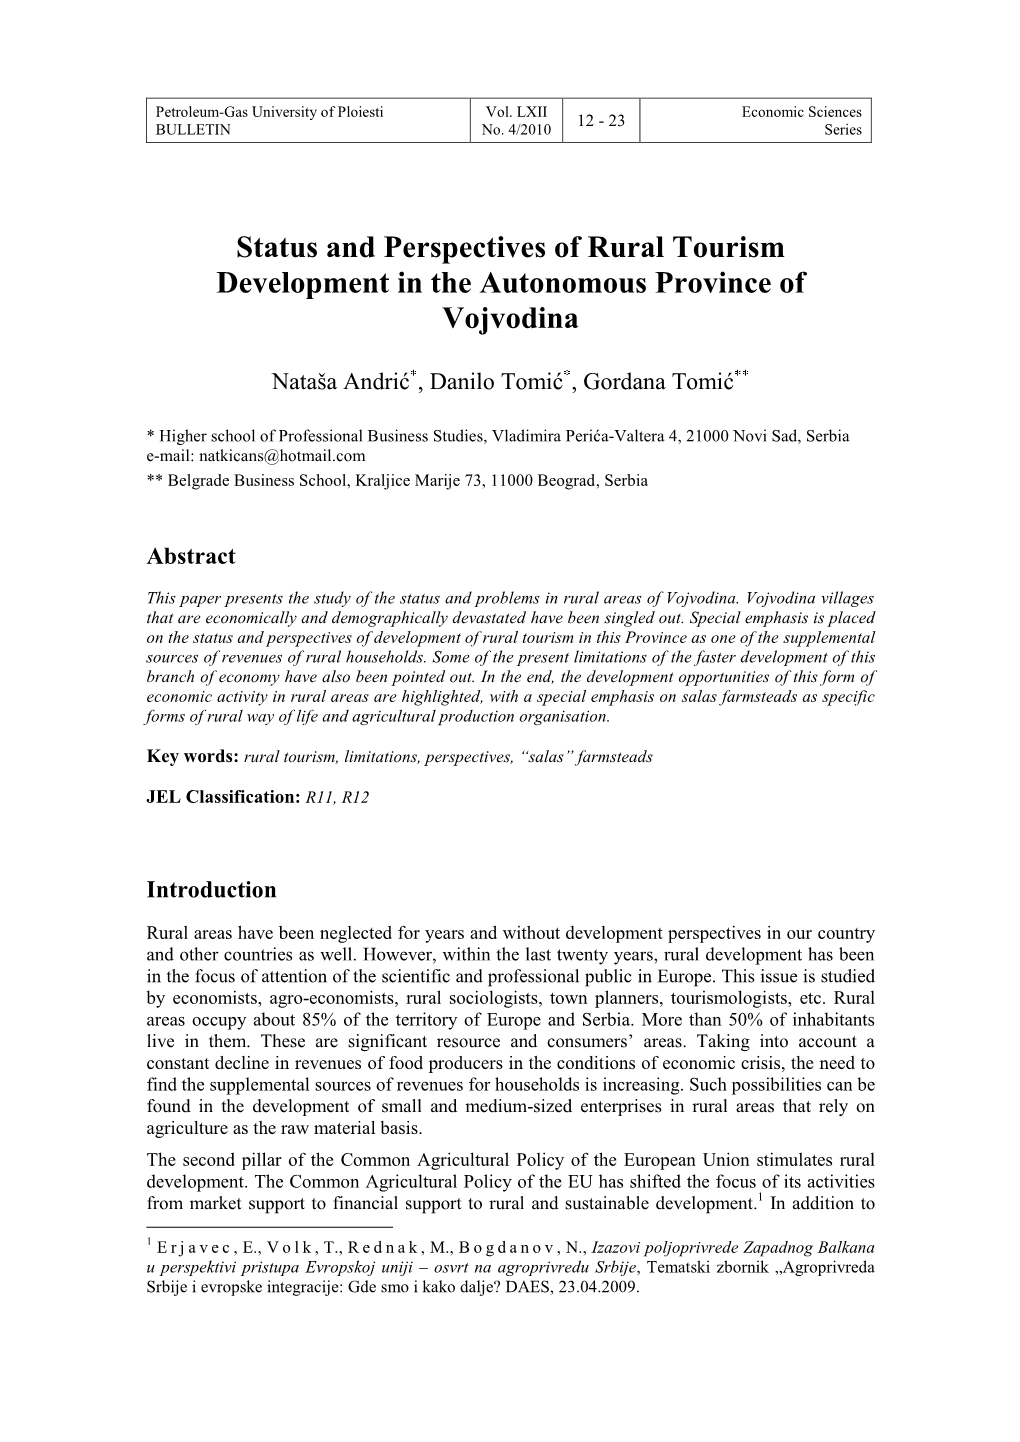 Status and Perspectives of Rural Tourism Development in the Autonomous Province of Vojvodina